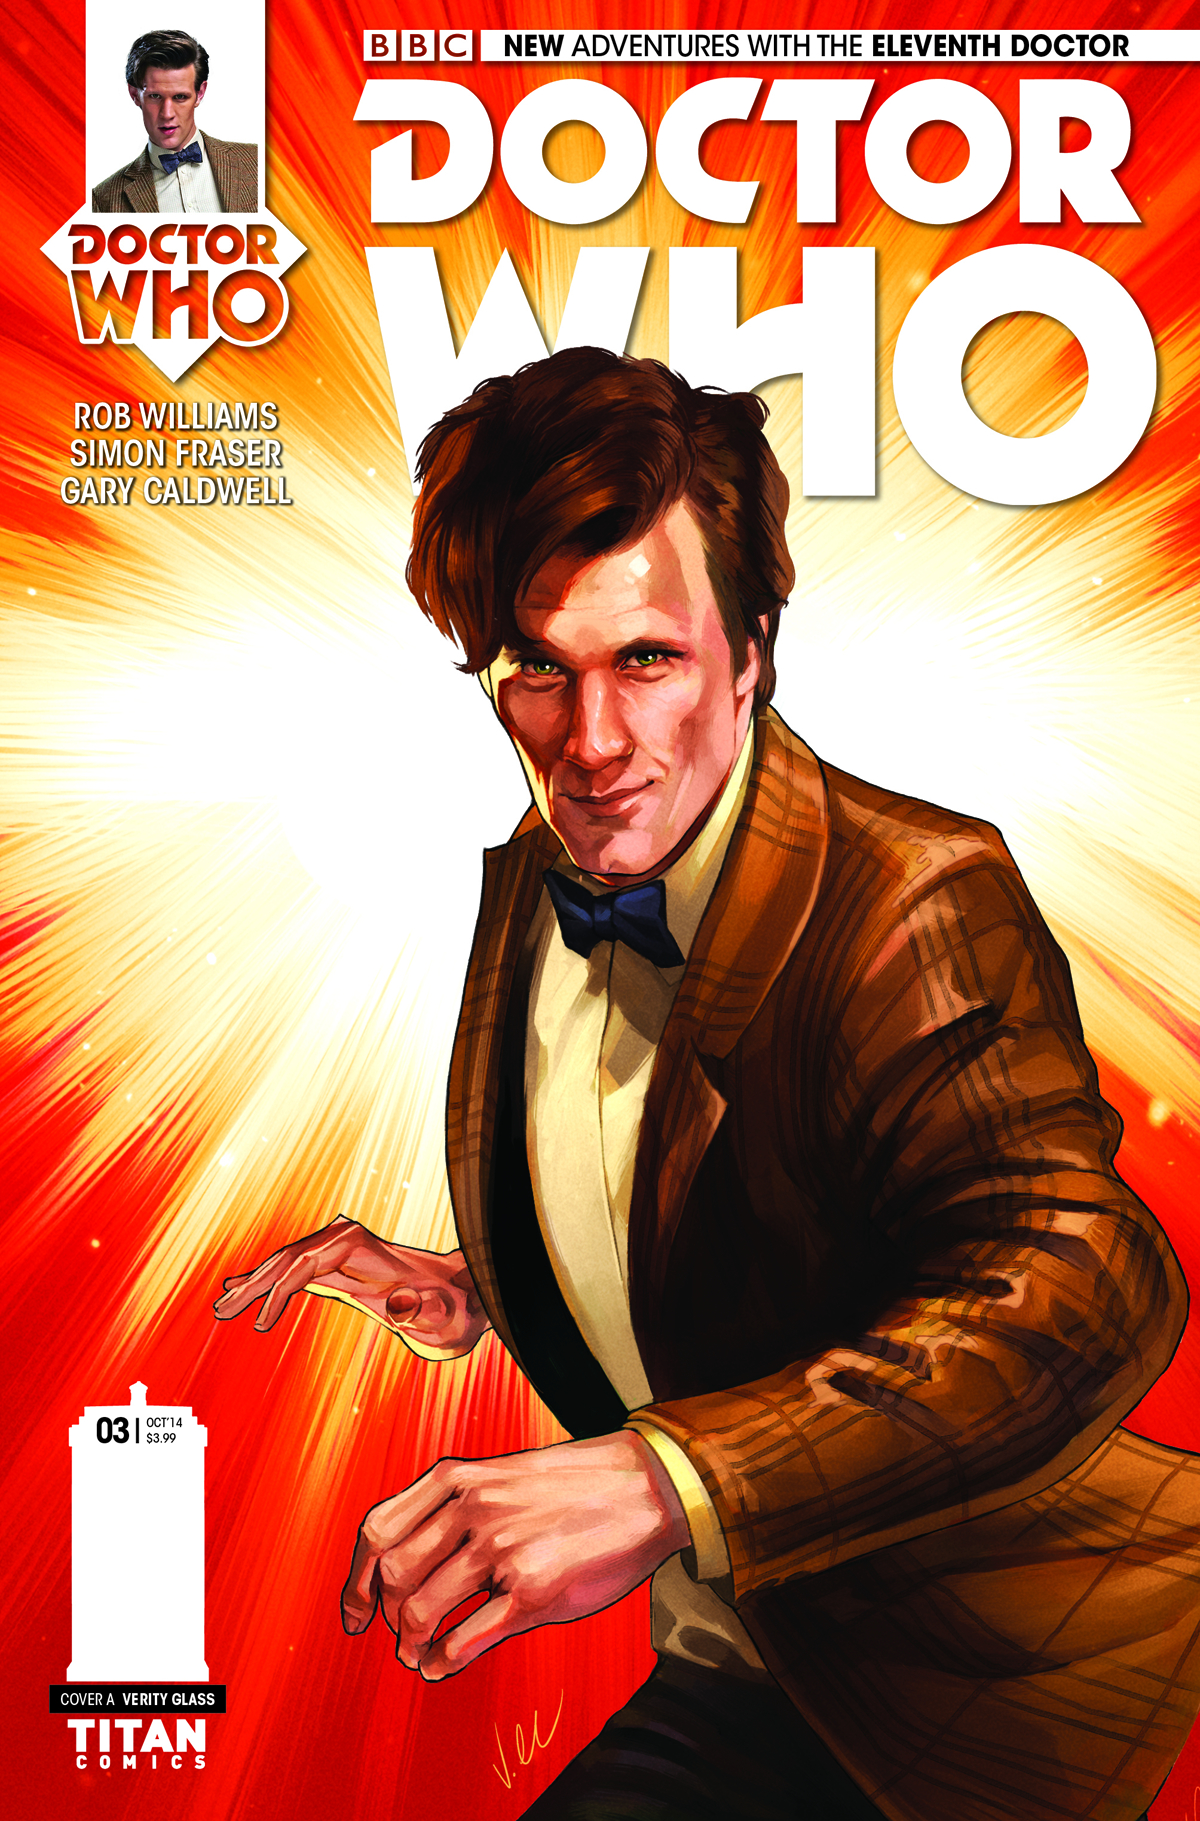 DOCTOR WHO 11TH #3 REG GLASS